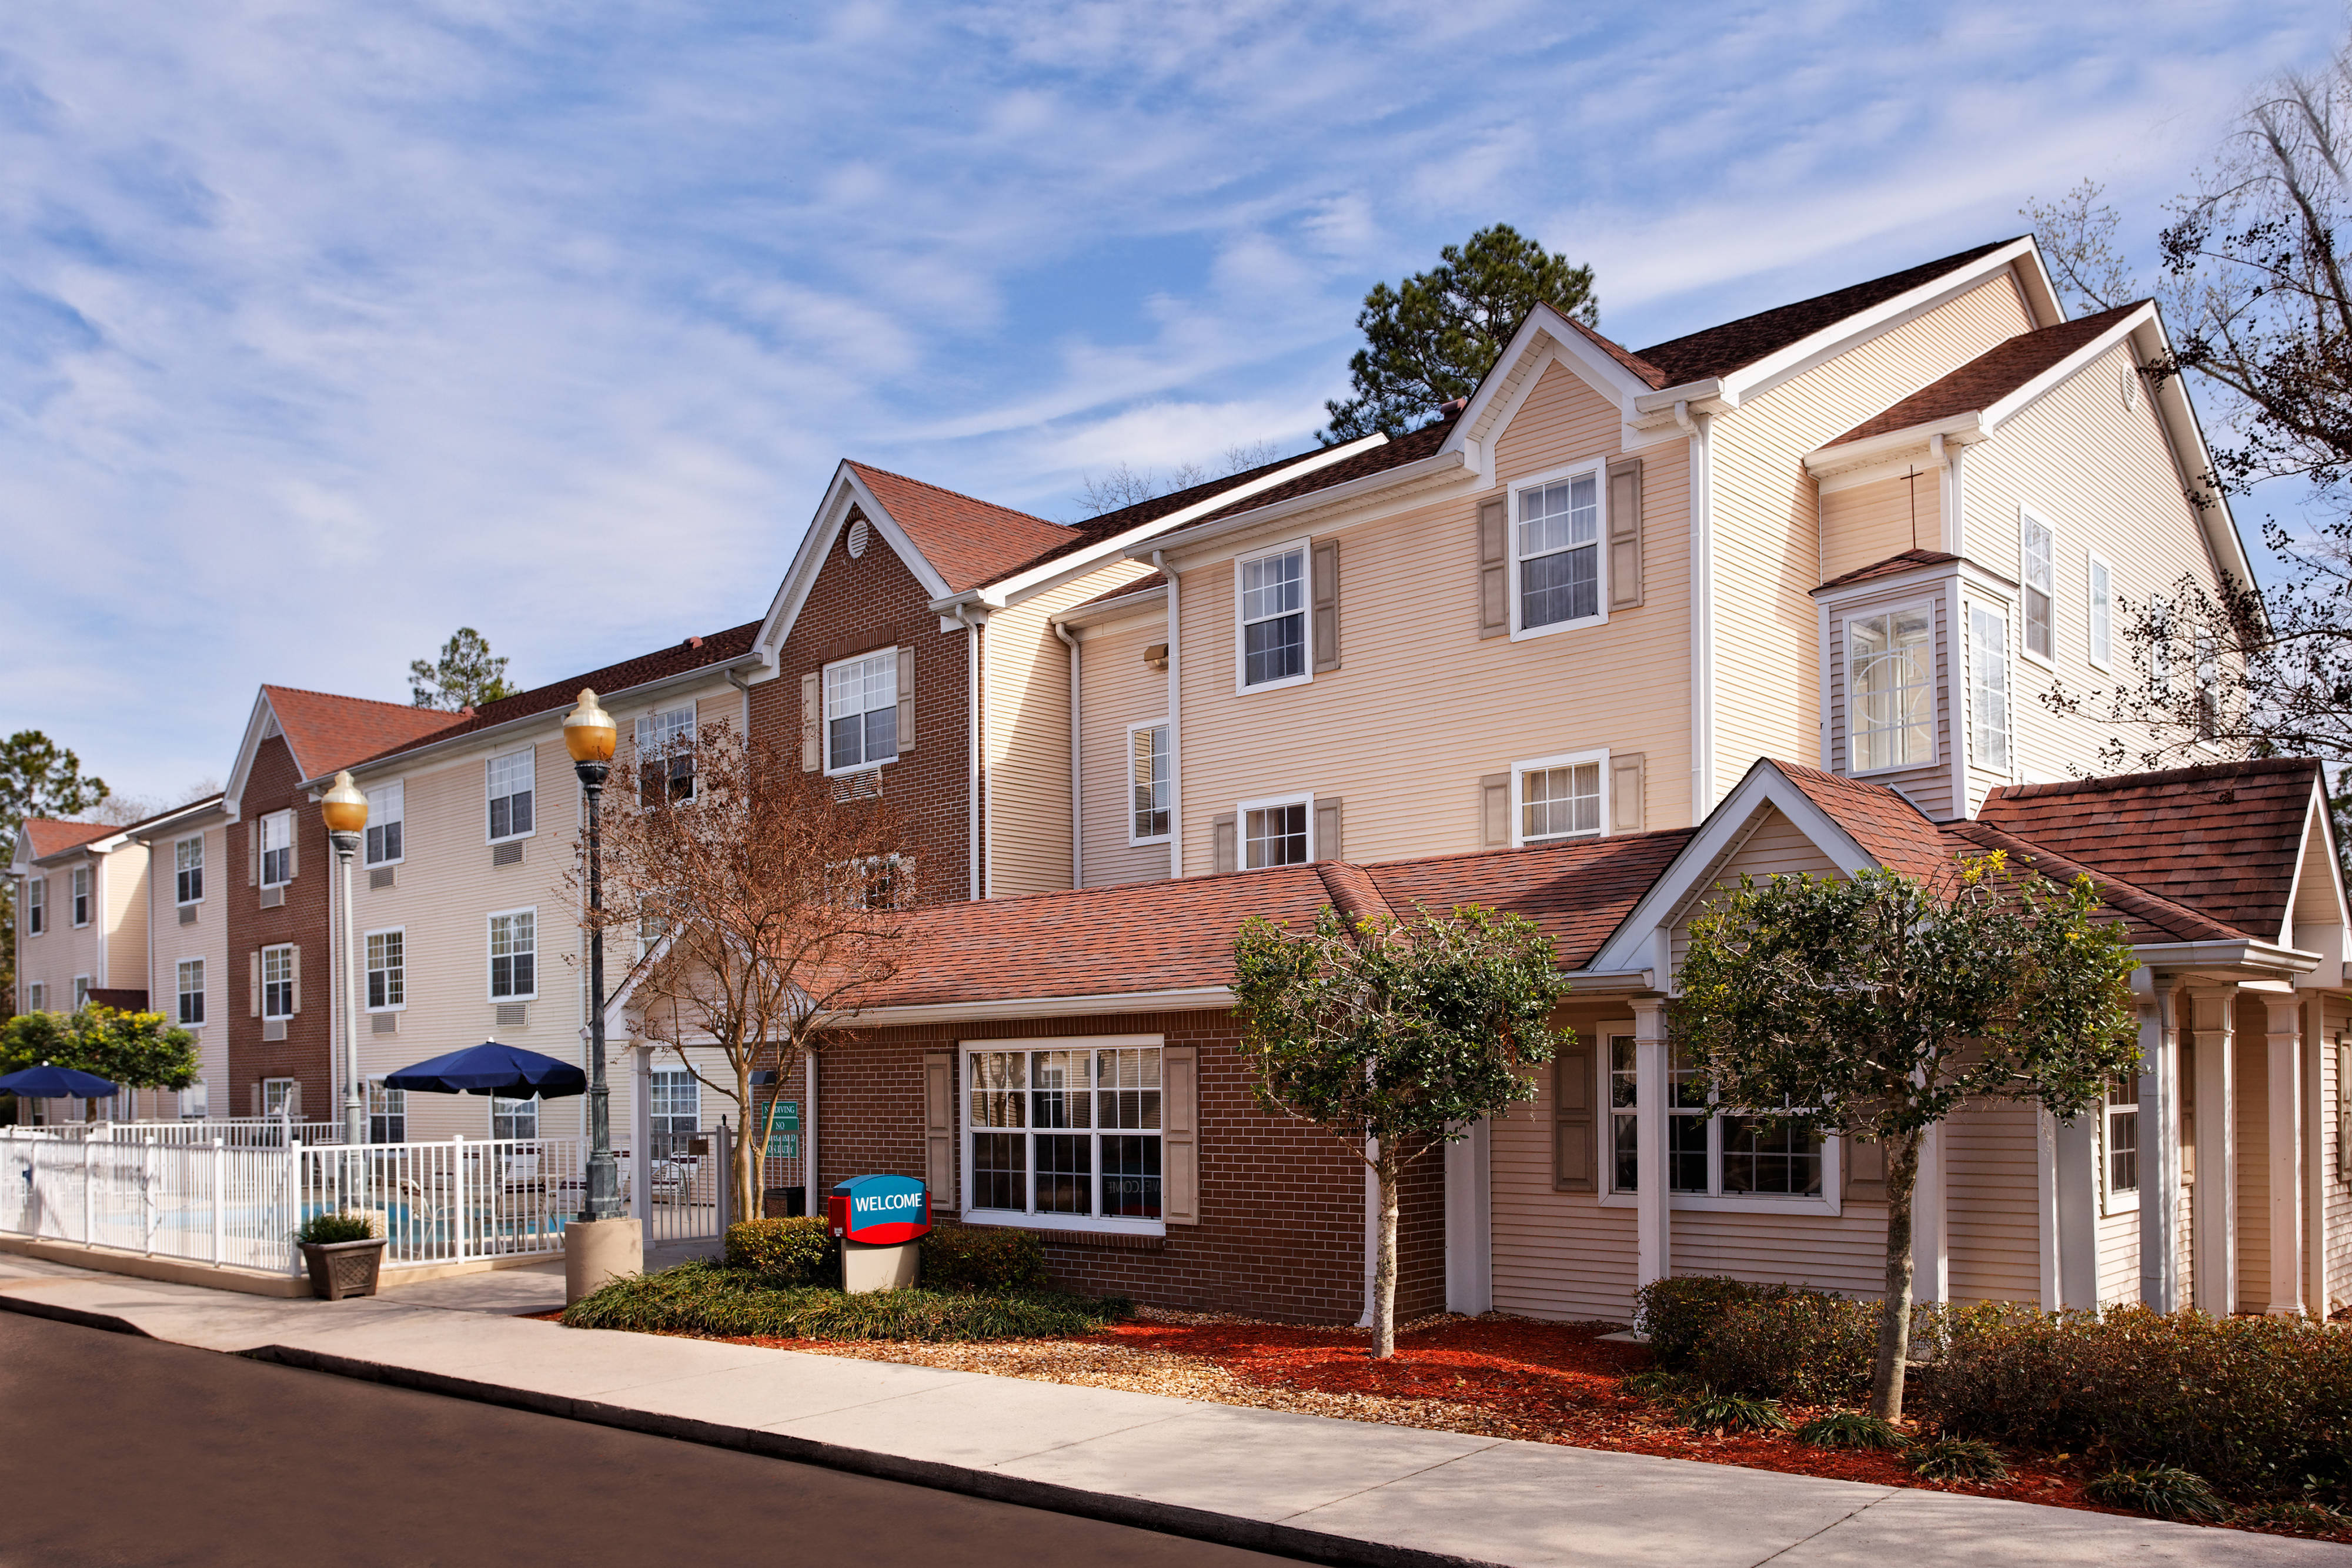 Photo of TownePlace Suites Tallahassee North/Capital Circle, Tallahassee, FL